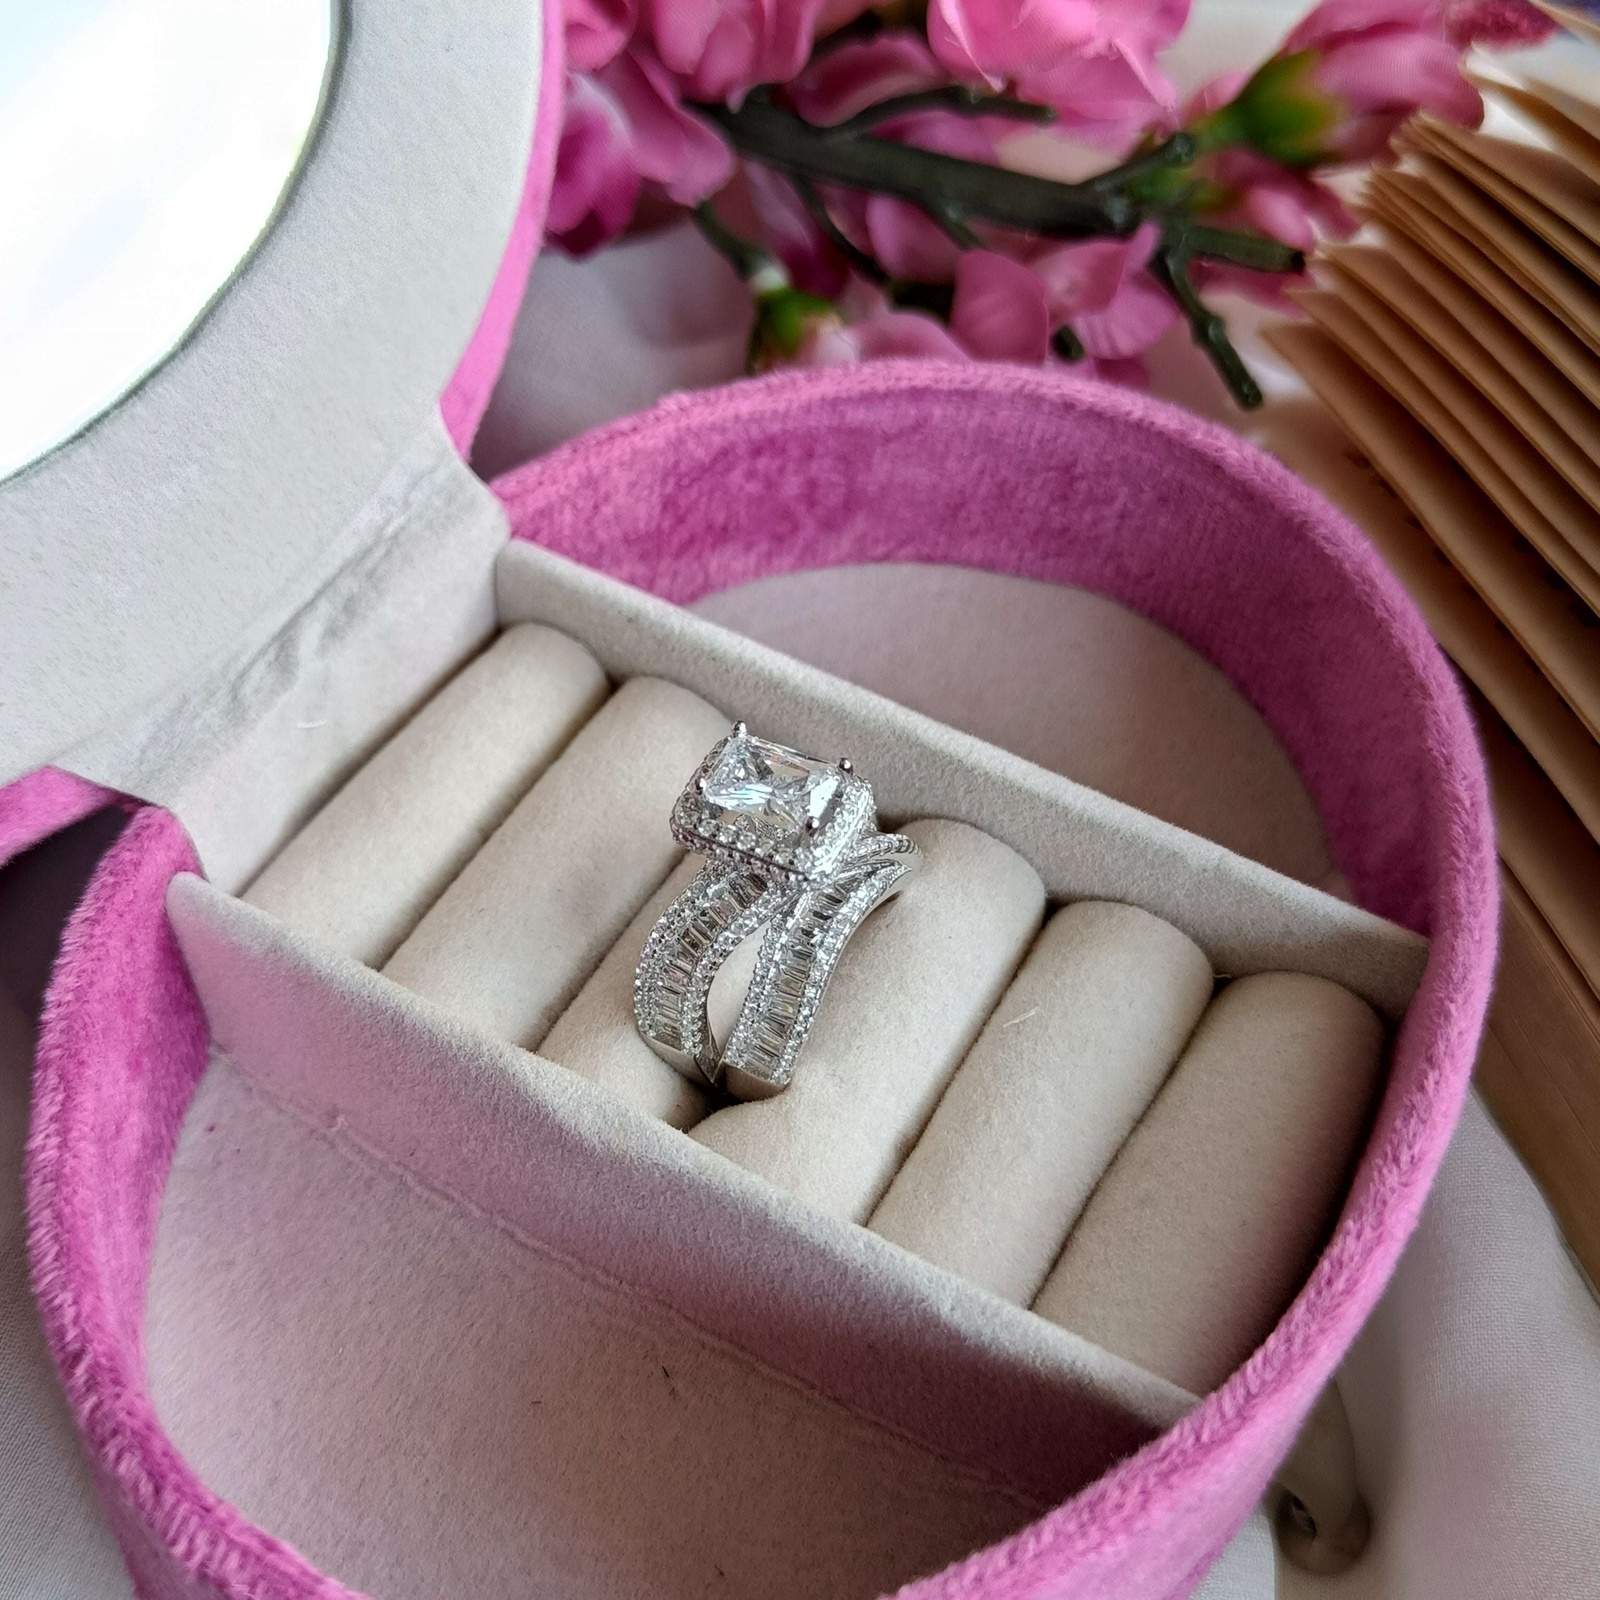 Vs sterling silver cocktail ring 091